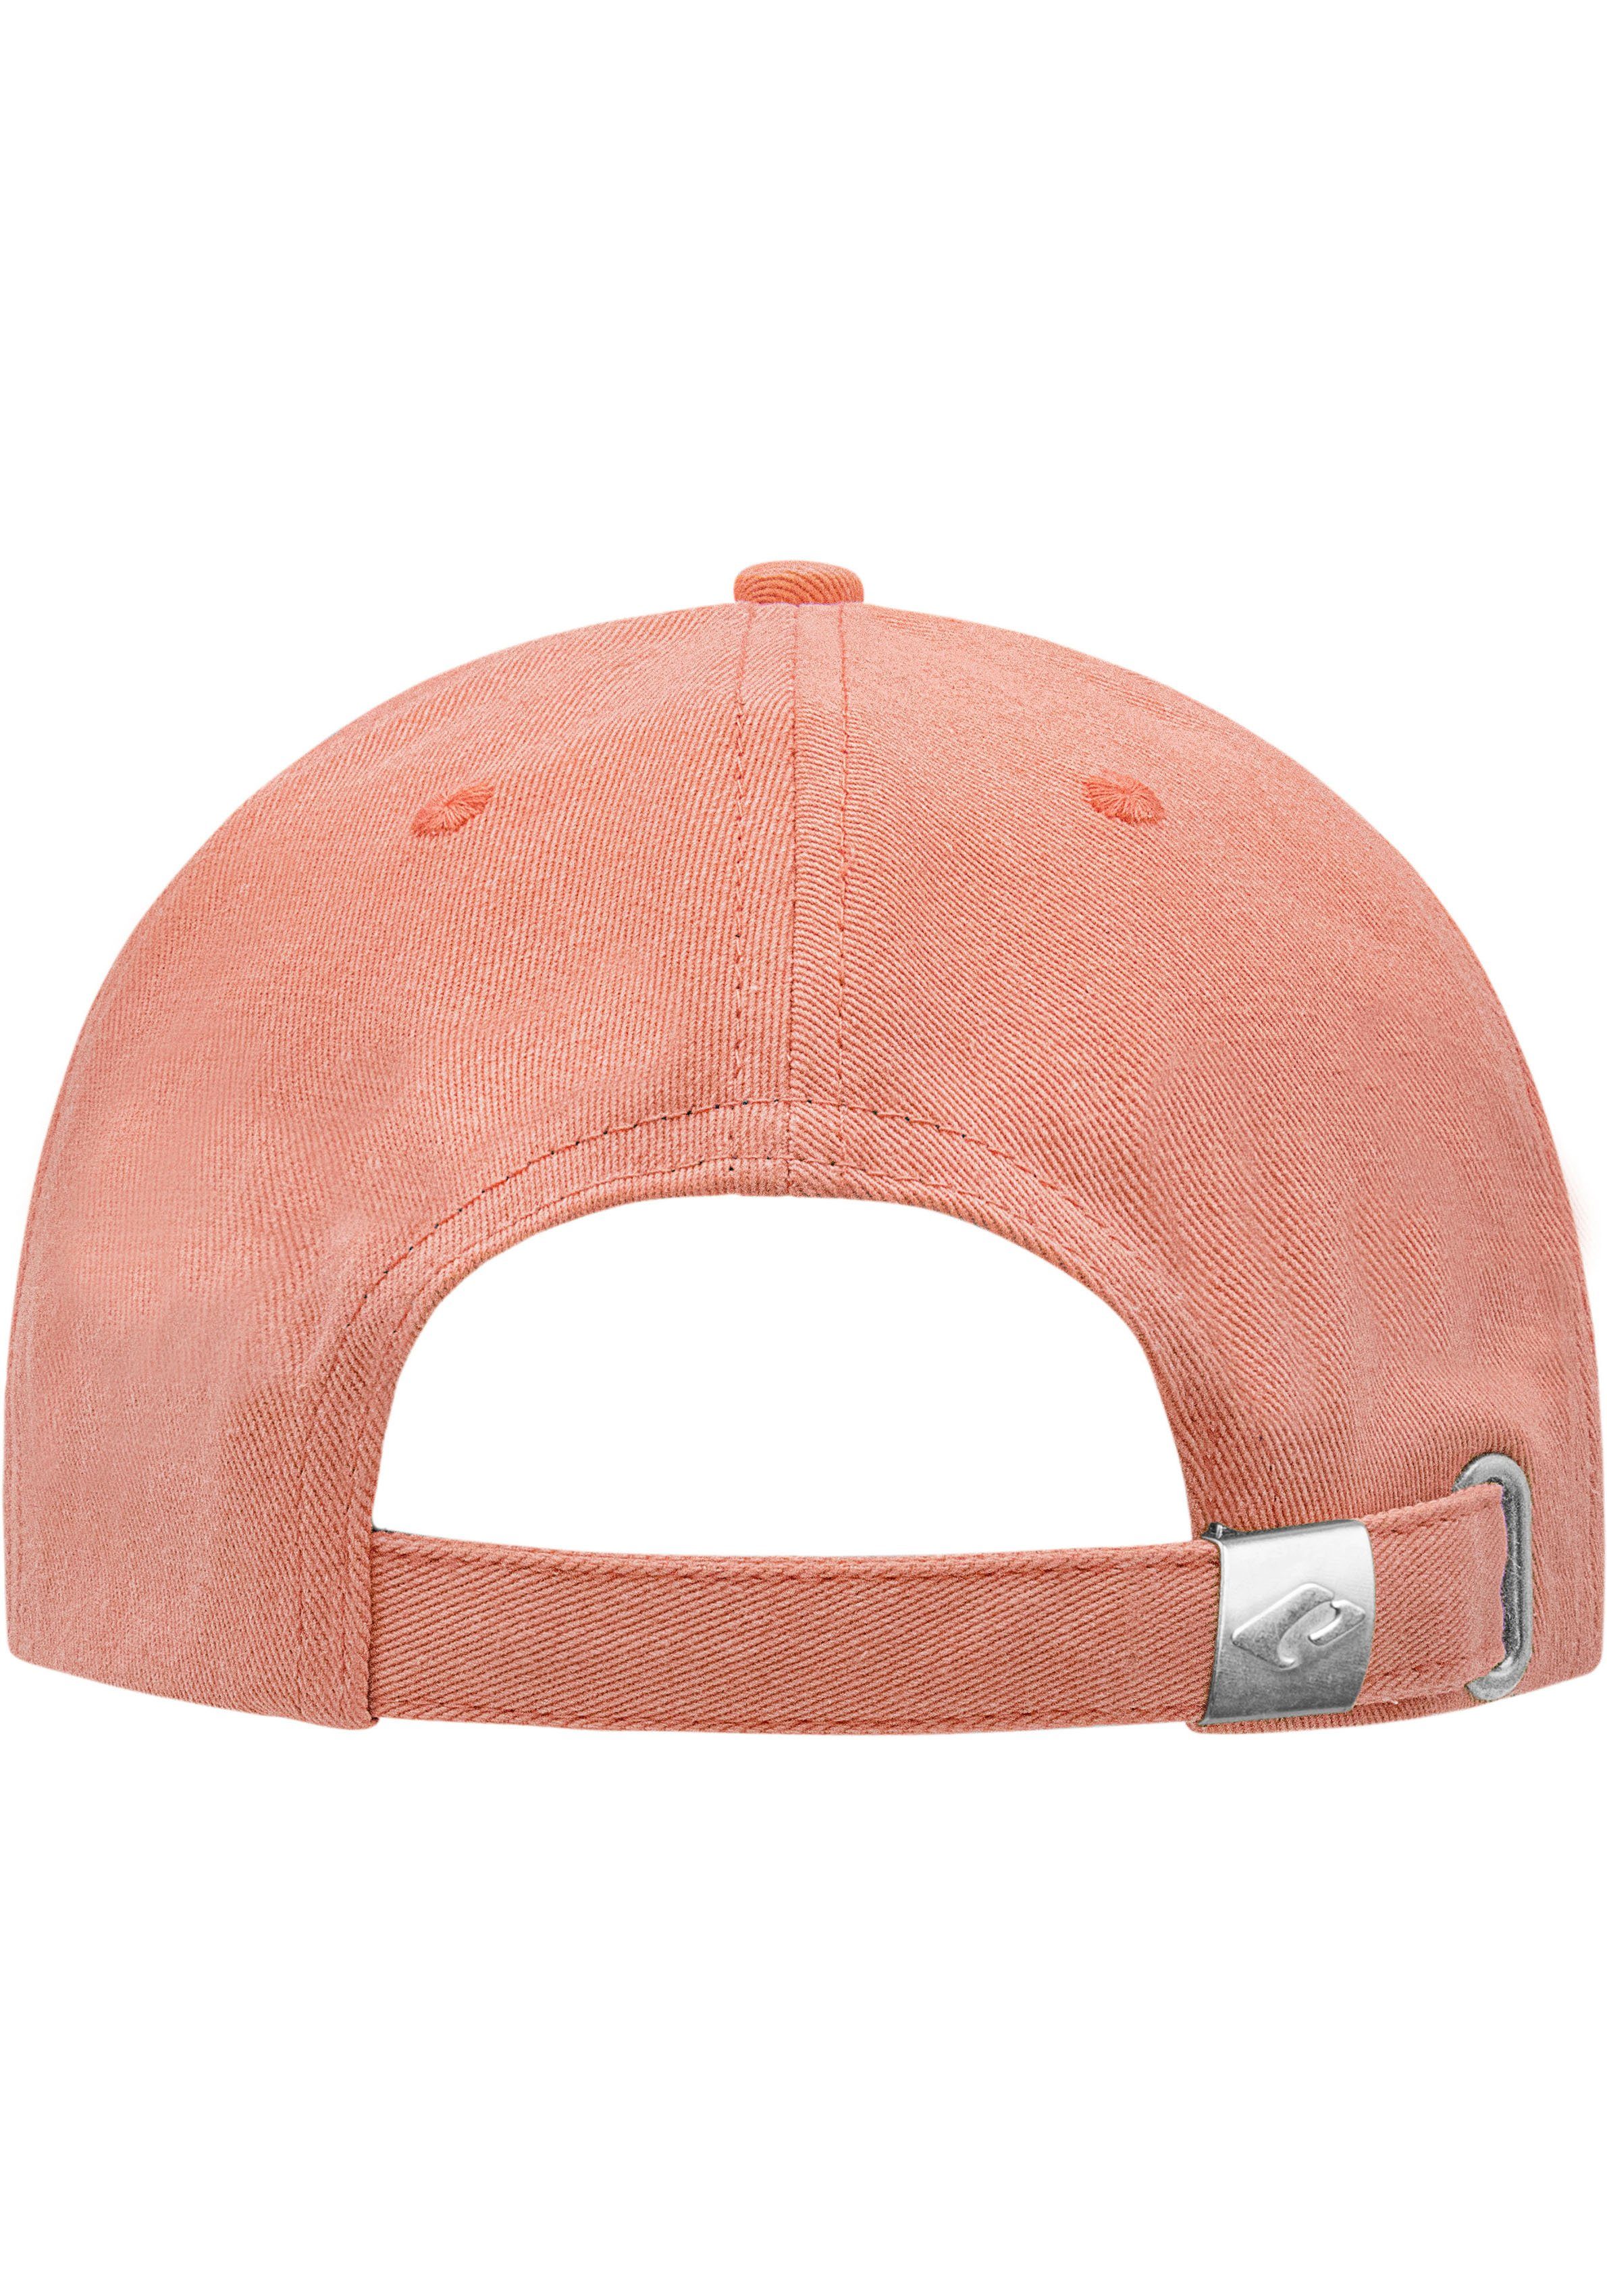 chillouts Baseball Arklow Cap Hat coral